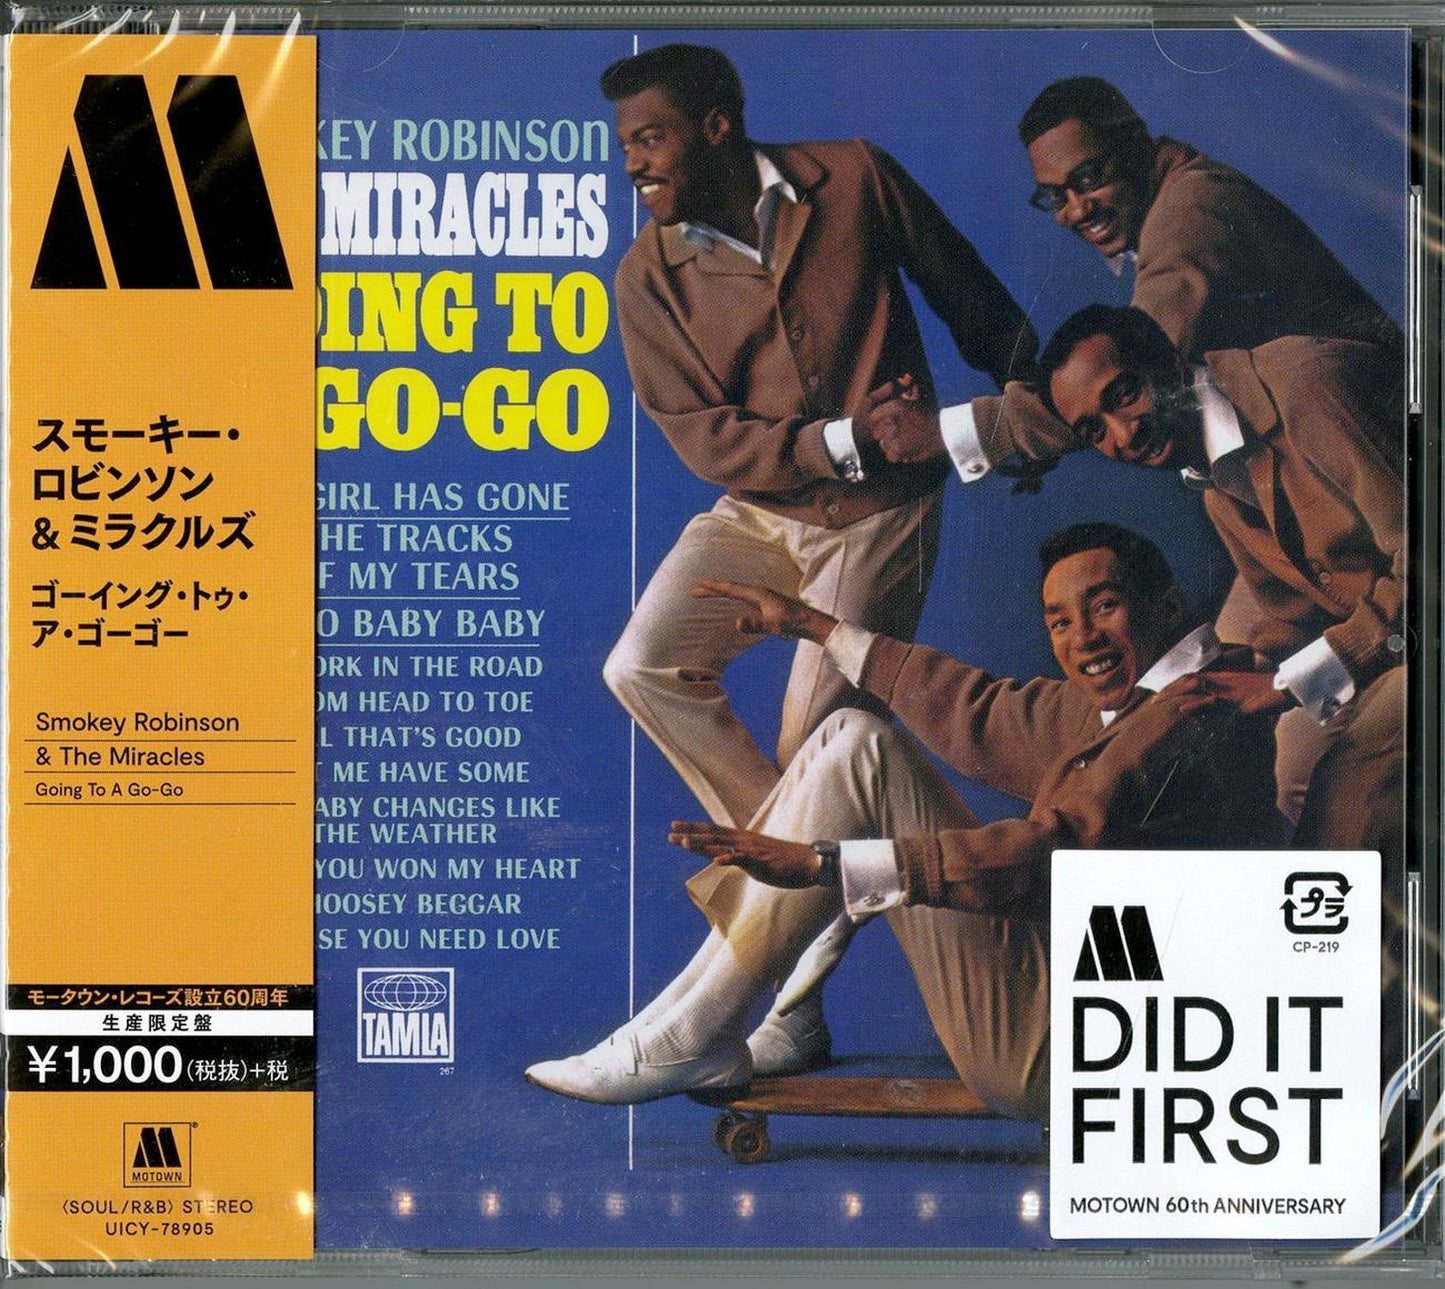 Smokey Robinson & The Miracles - Going To A-Go-Go - Japan  CD Limited Edition